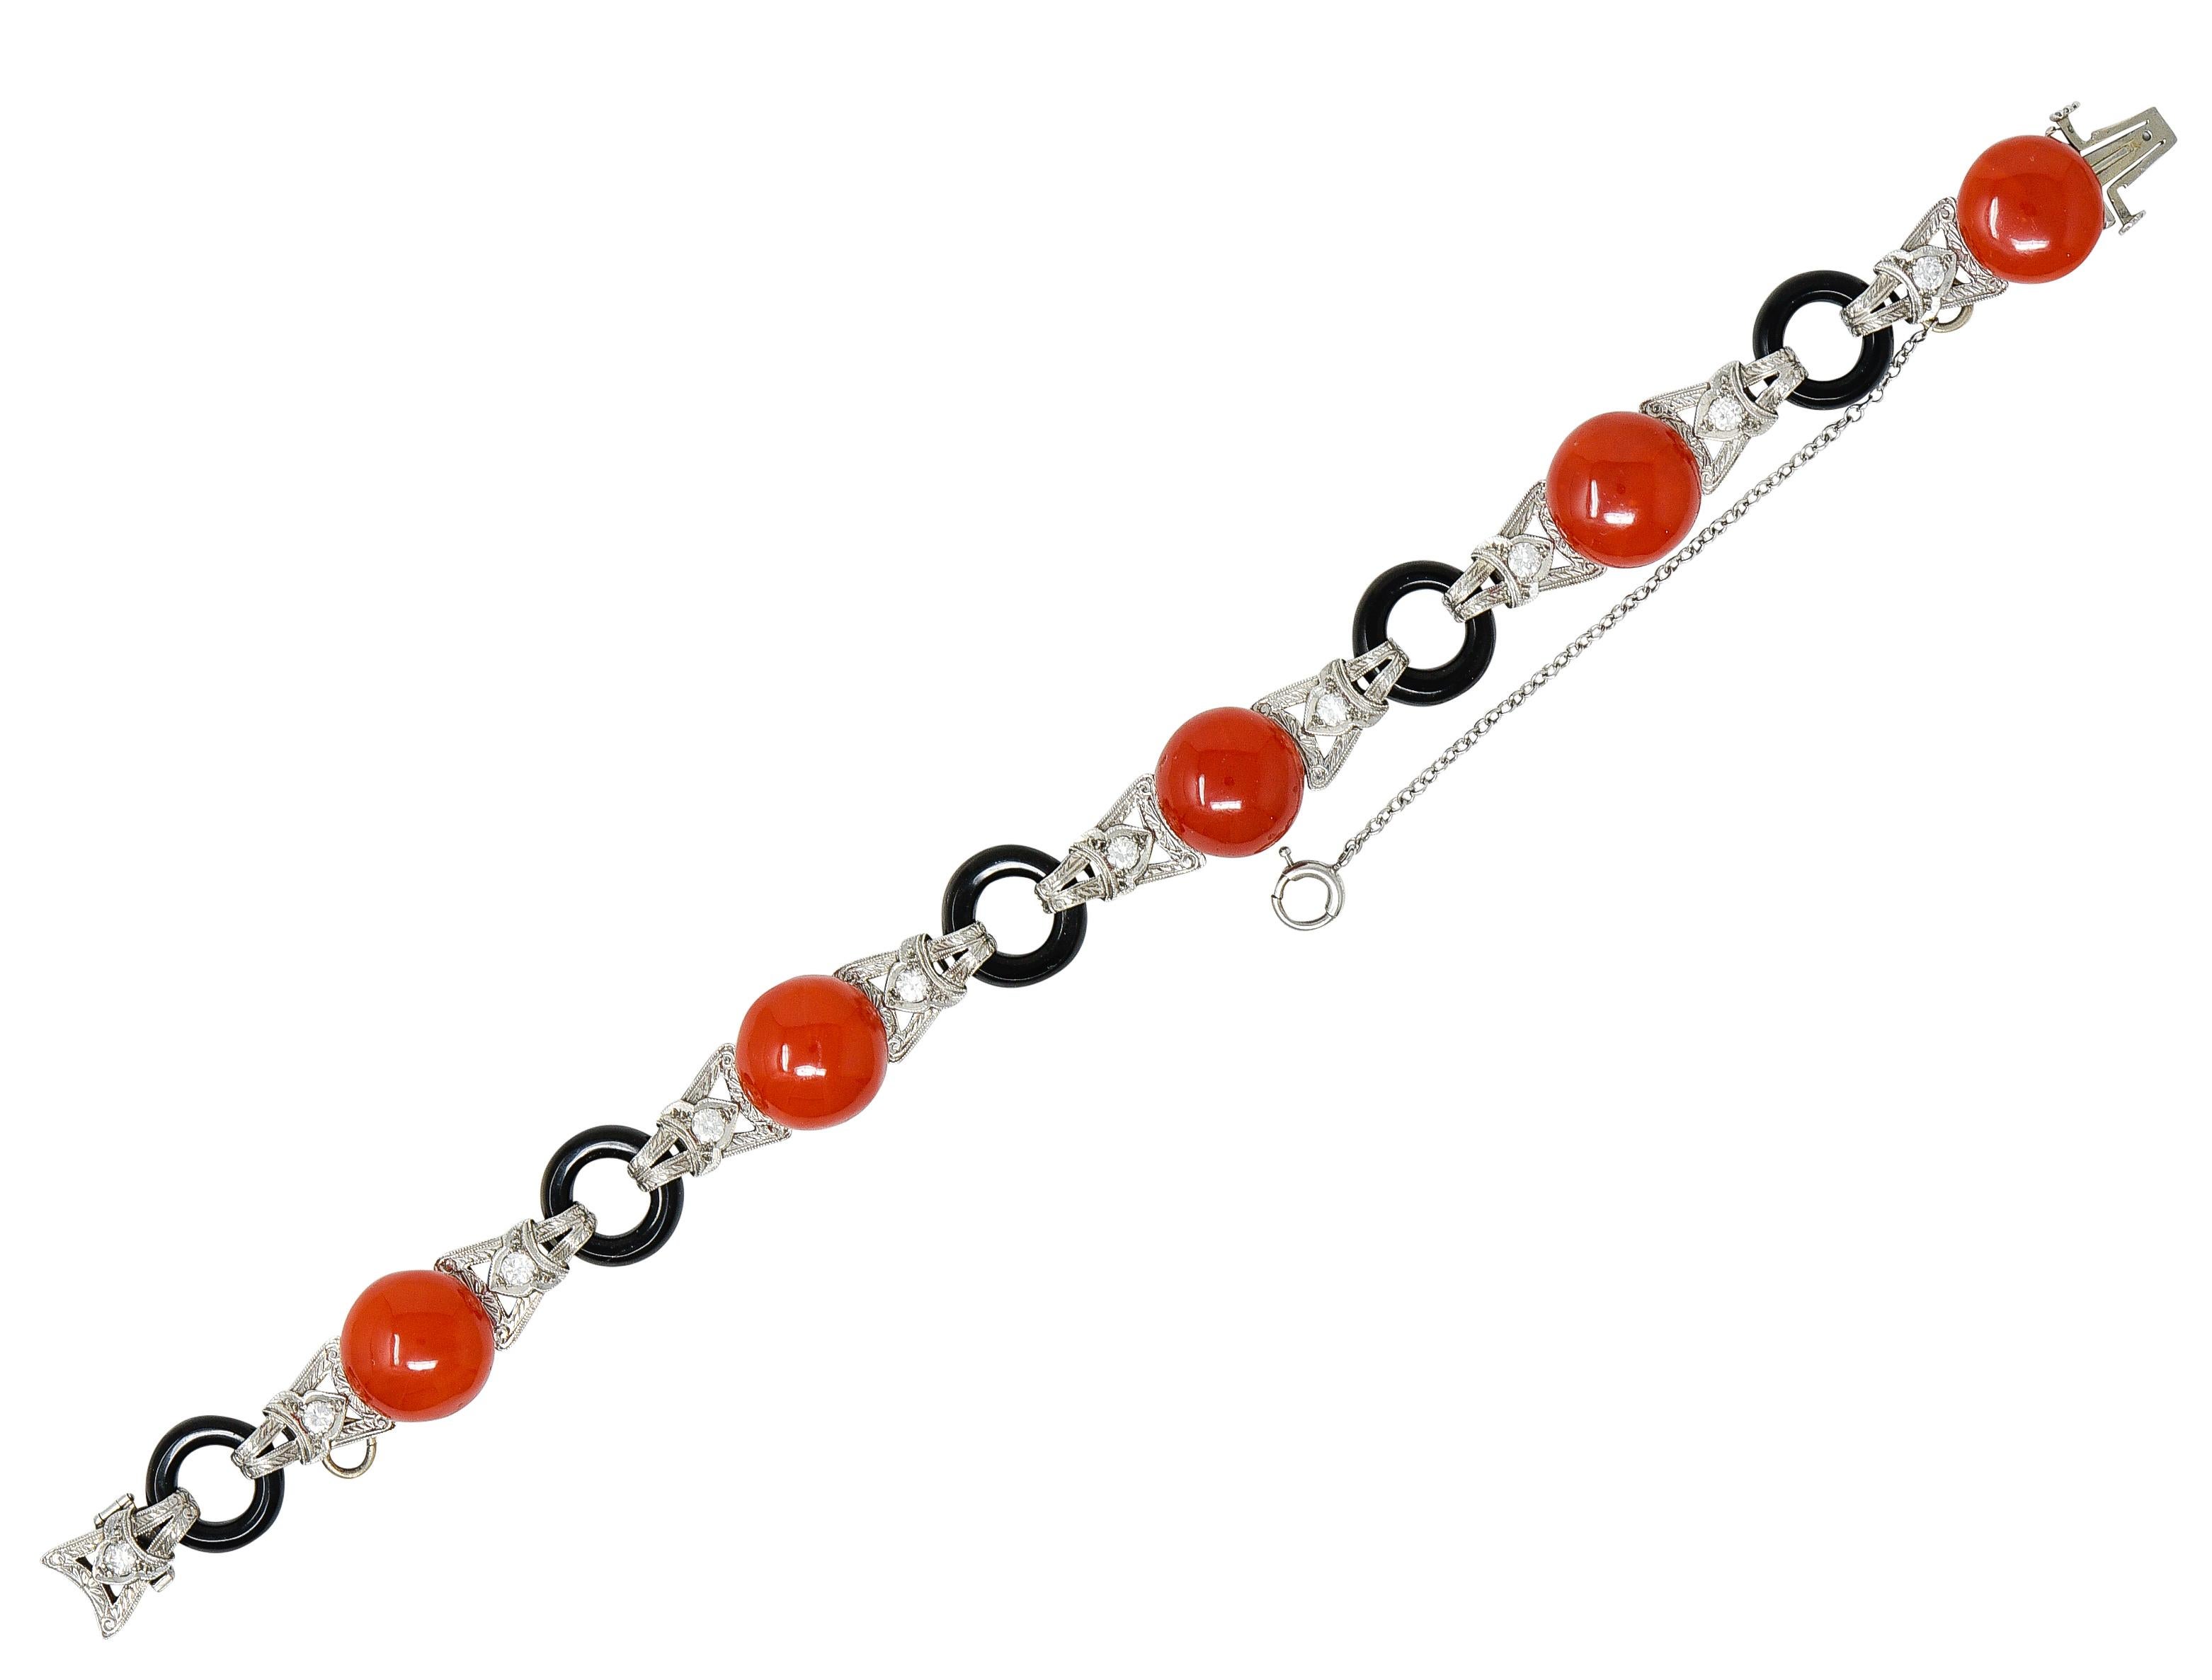 Link bracelet features button cabochon coral alternating with donut ring onyx. Coral are opaque and uniformly orangey red in color while measuring approximately 11.0 mm. Onyx are opaque black with good to very good polish while measuring